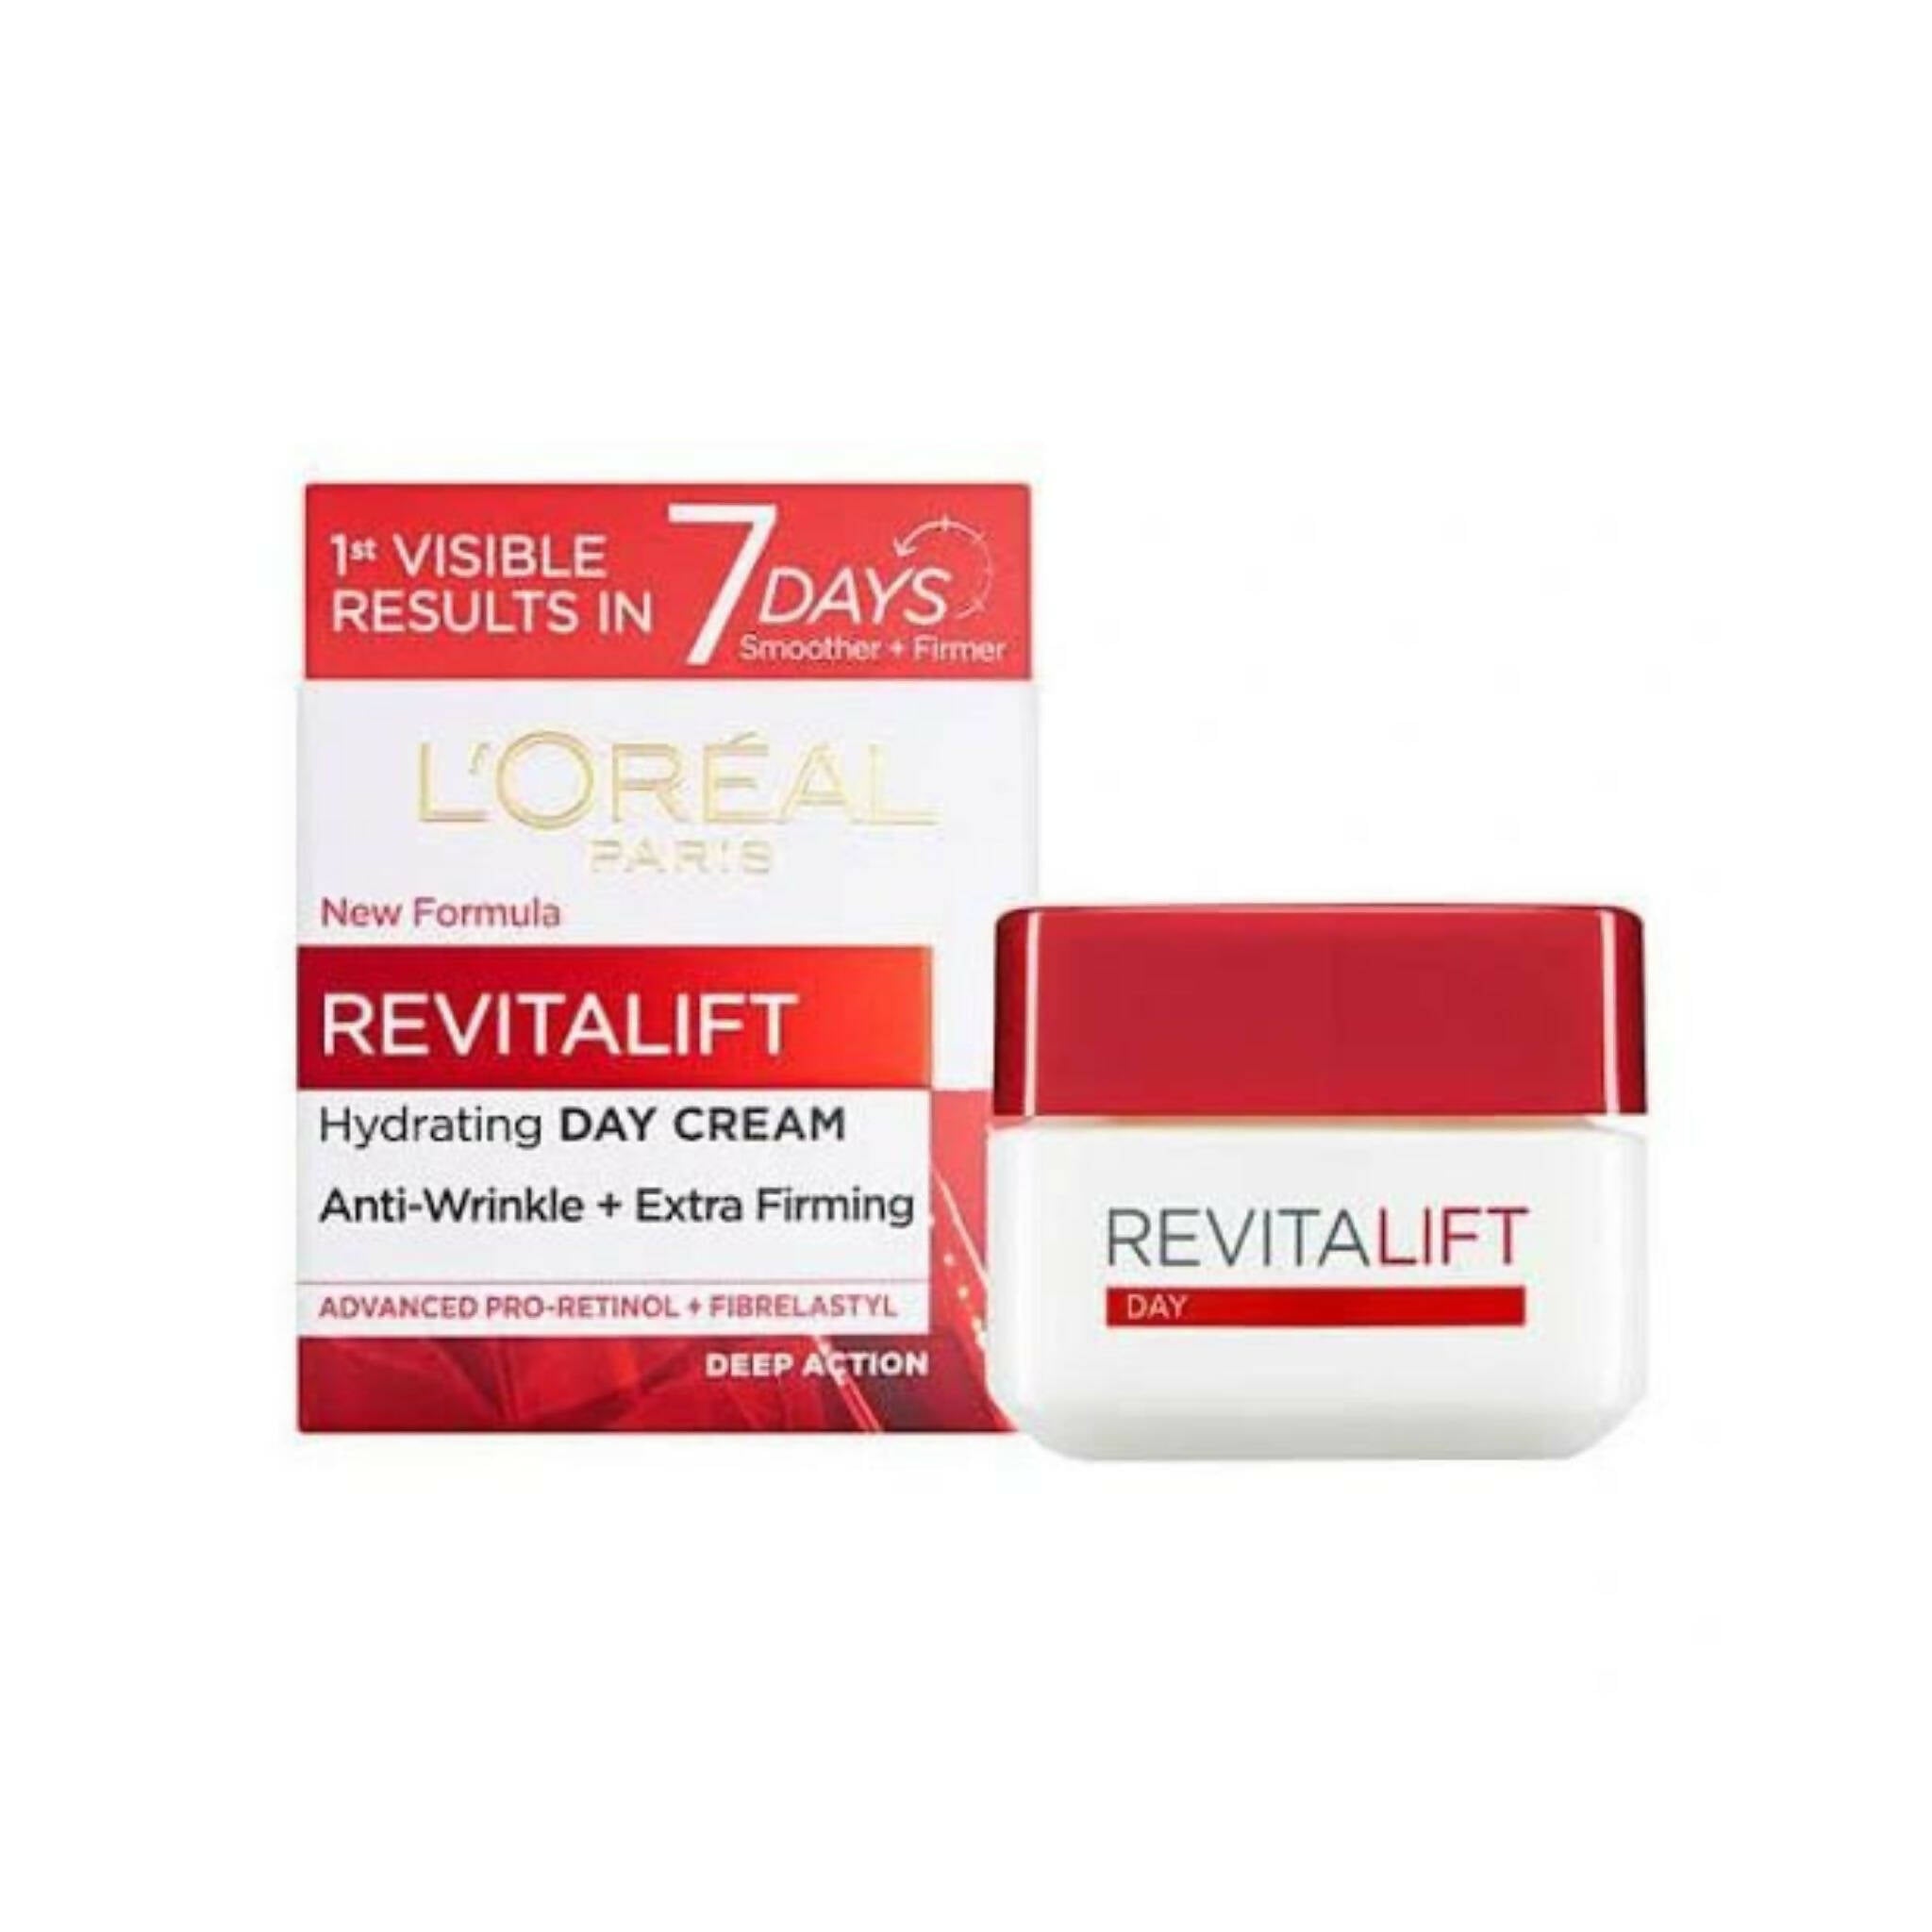 L'Oreal Revital Lift Day Cream, Daily Rejuvenation, for Youthful Skin